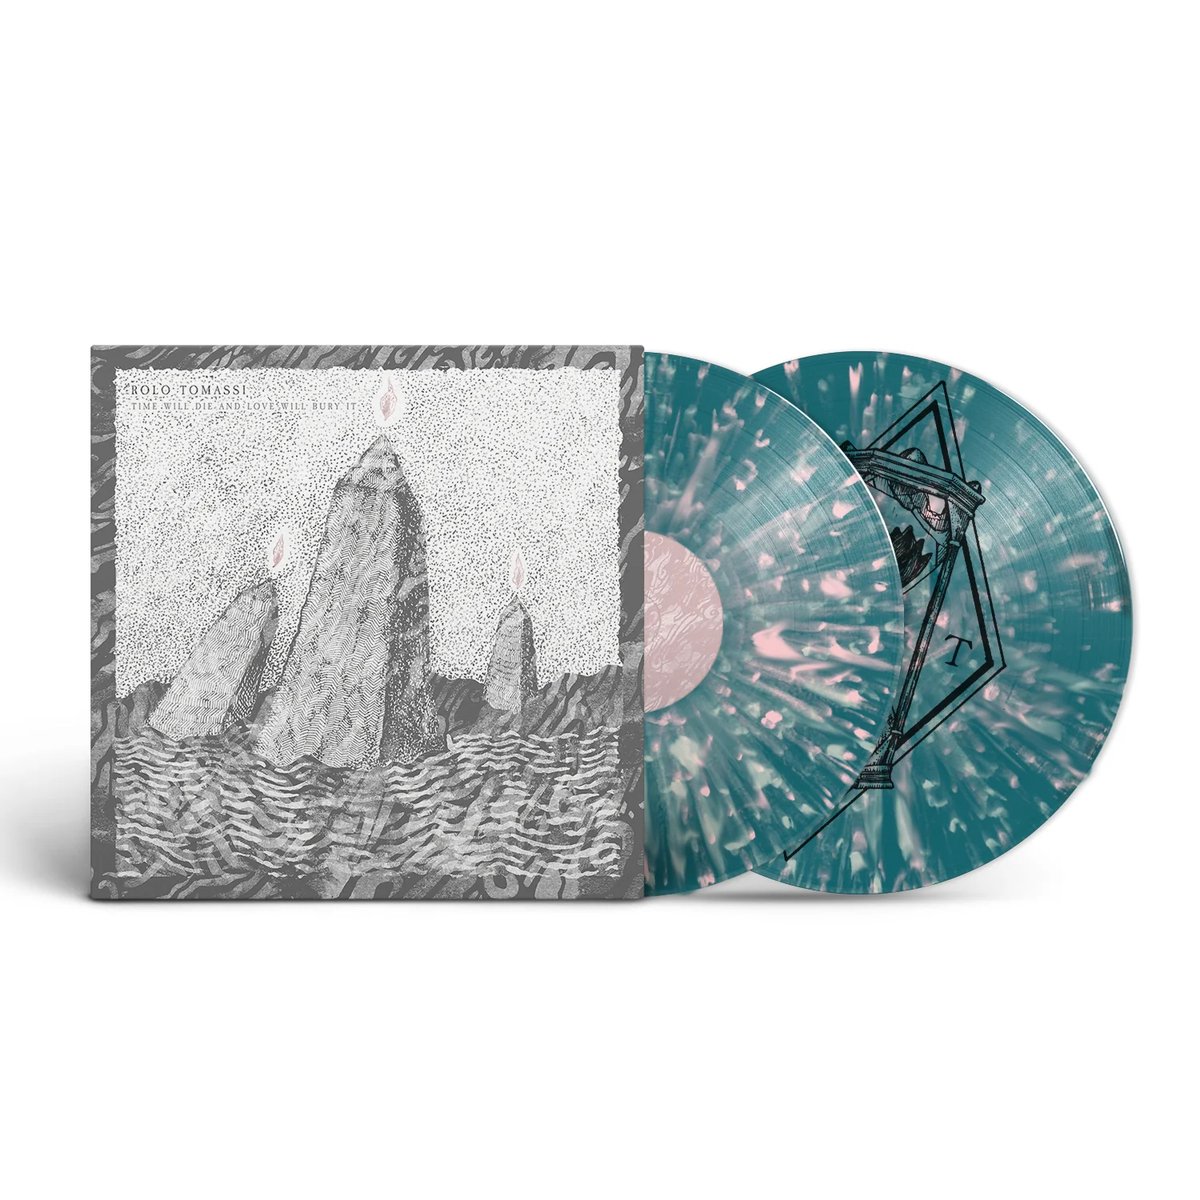 Bandcamp Friday! Cop one of these today if you haven't already - rolotomassi.bandcamp.com/merch